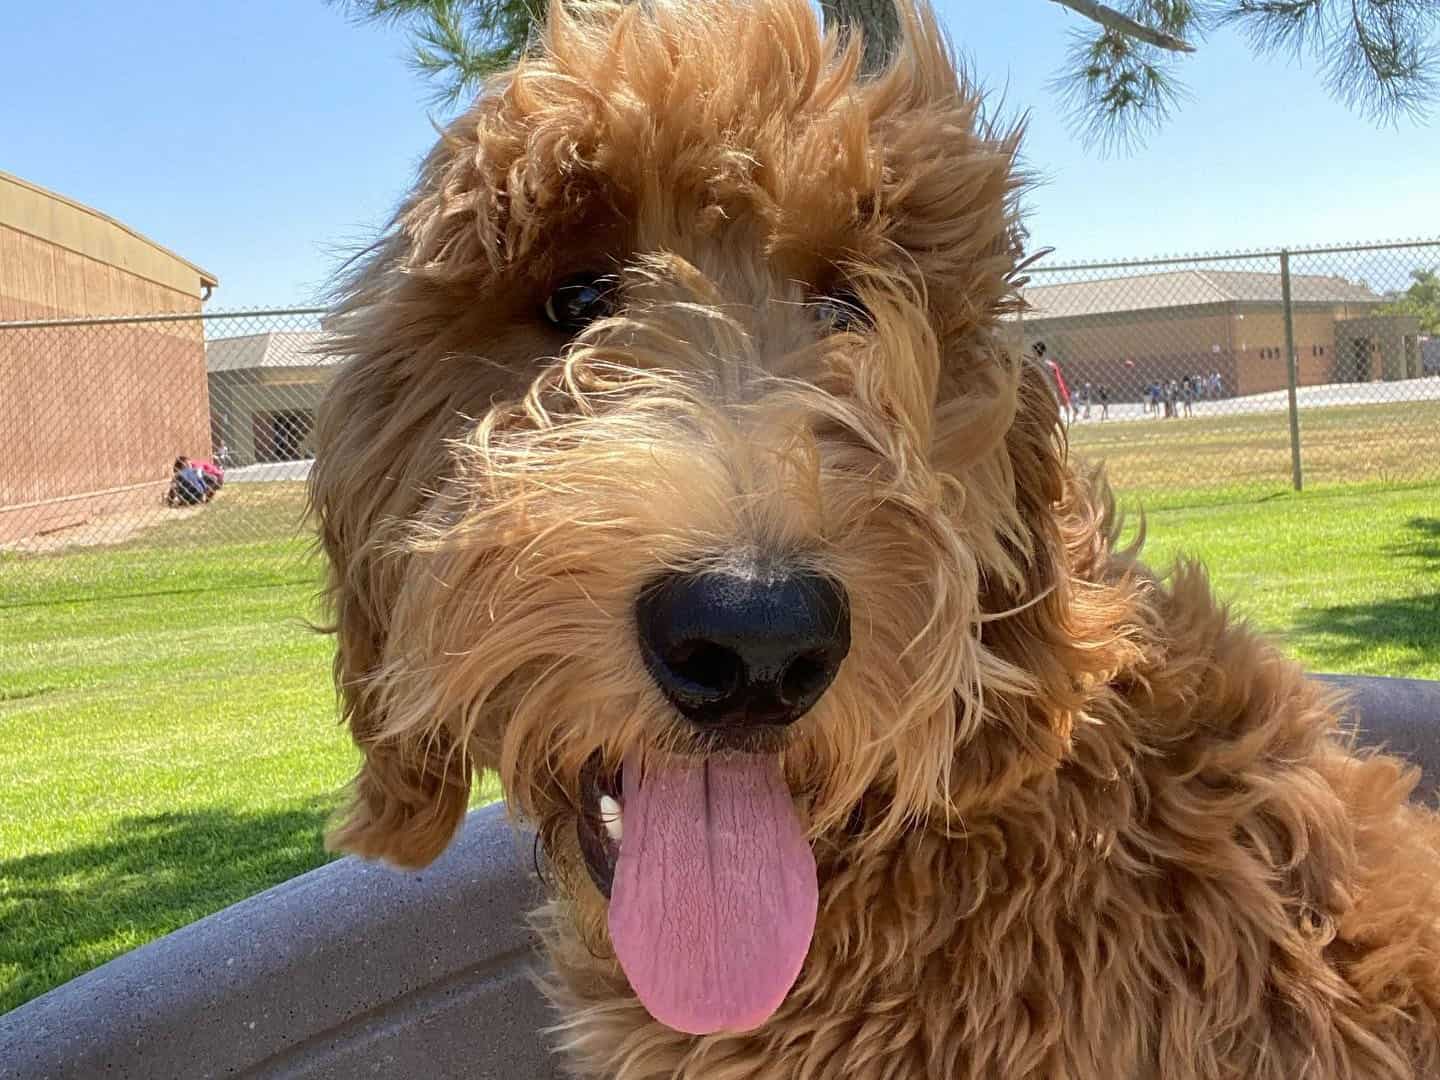 An F1 Standard Apricot Goldendoodle taking selfie at school